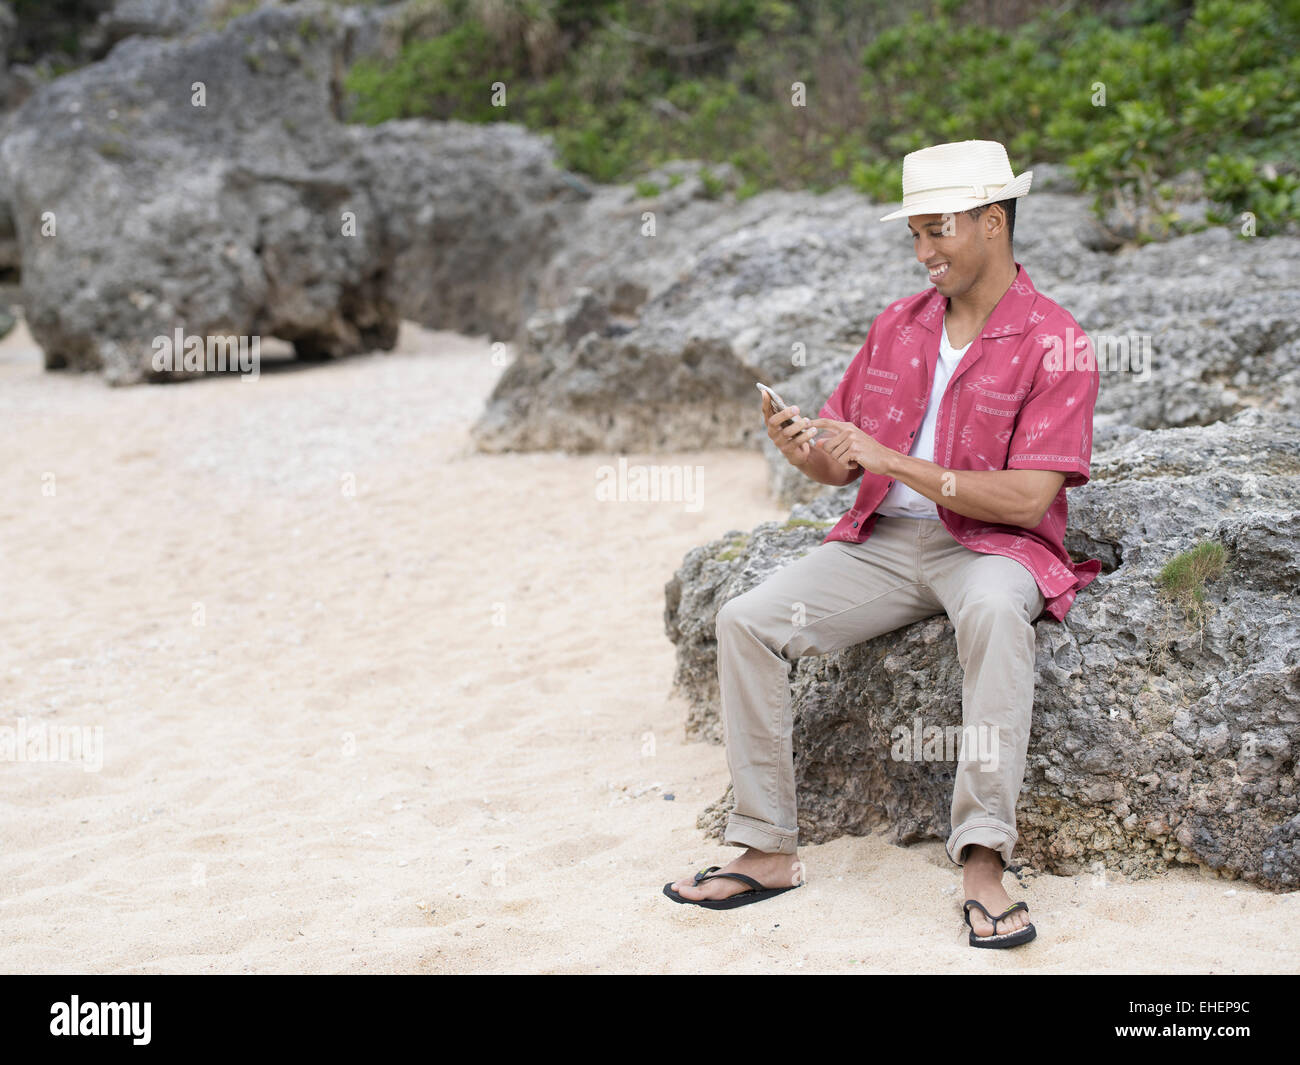 Man texting / checking internet on Apple iphone 6 smartphone while at the beach Stock Photo